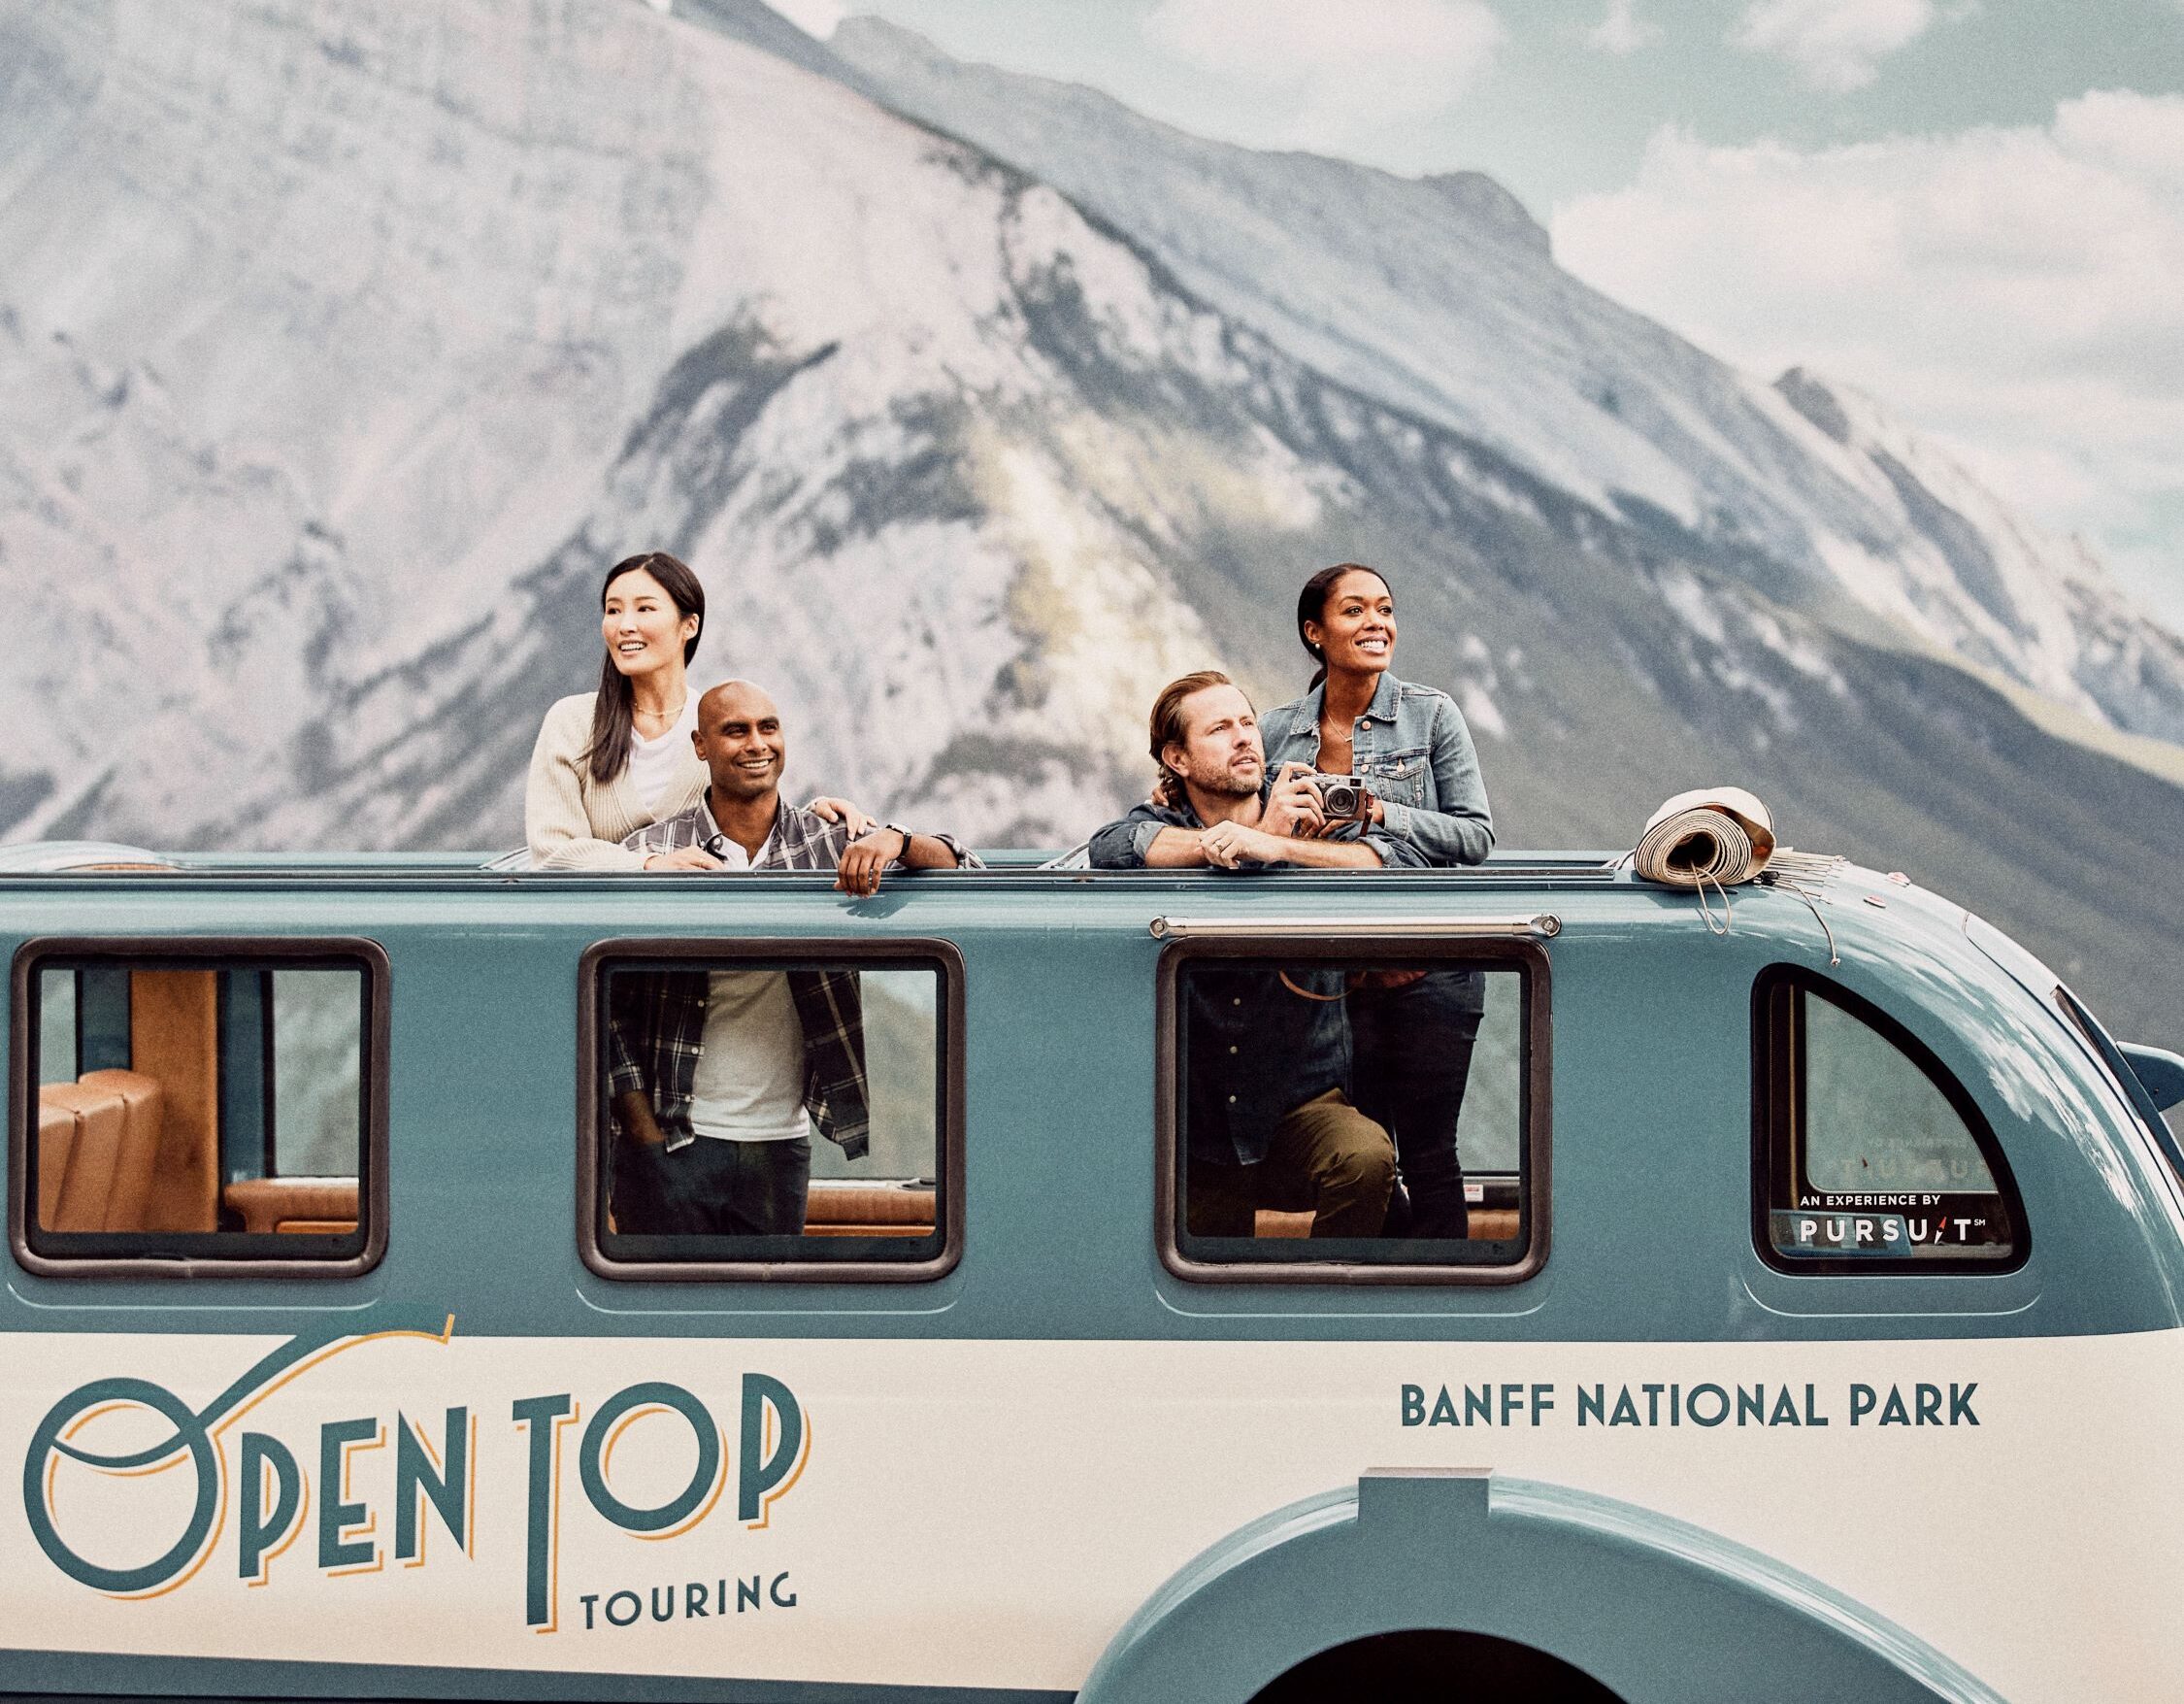 People in open top touring bus in front of mountains in Banff National Park.